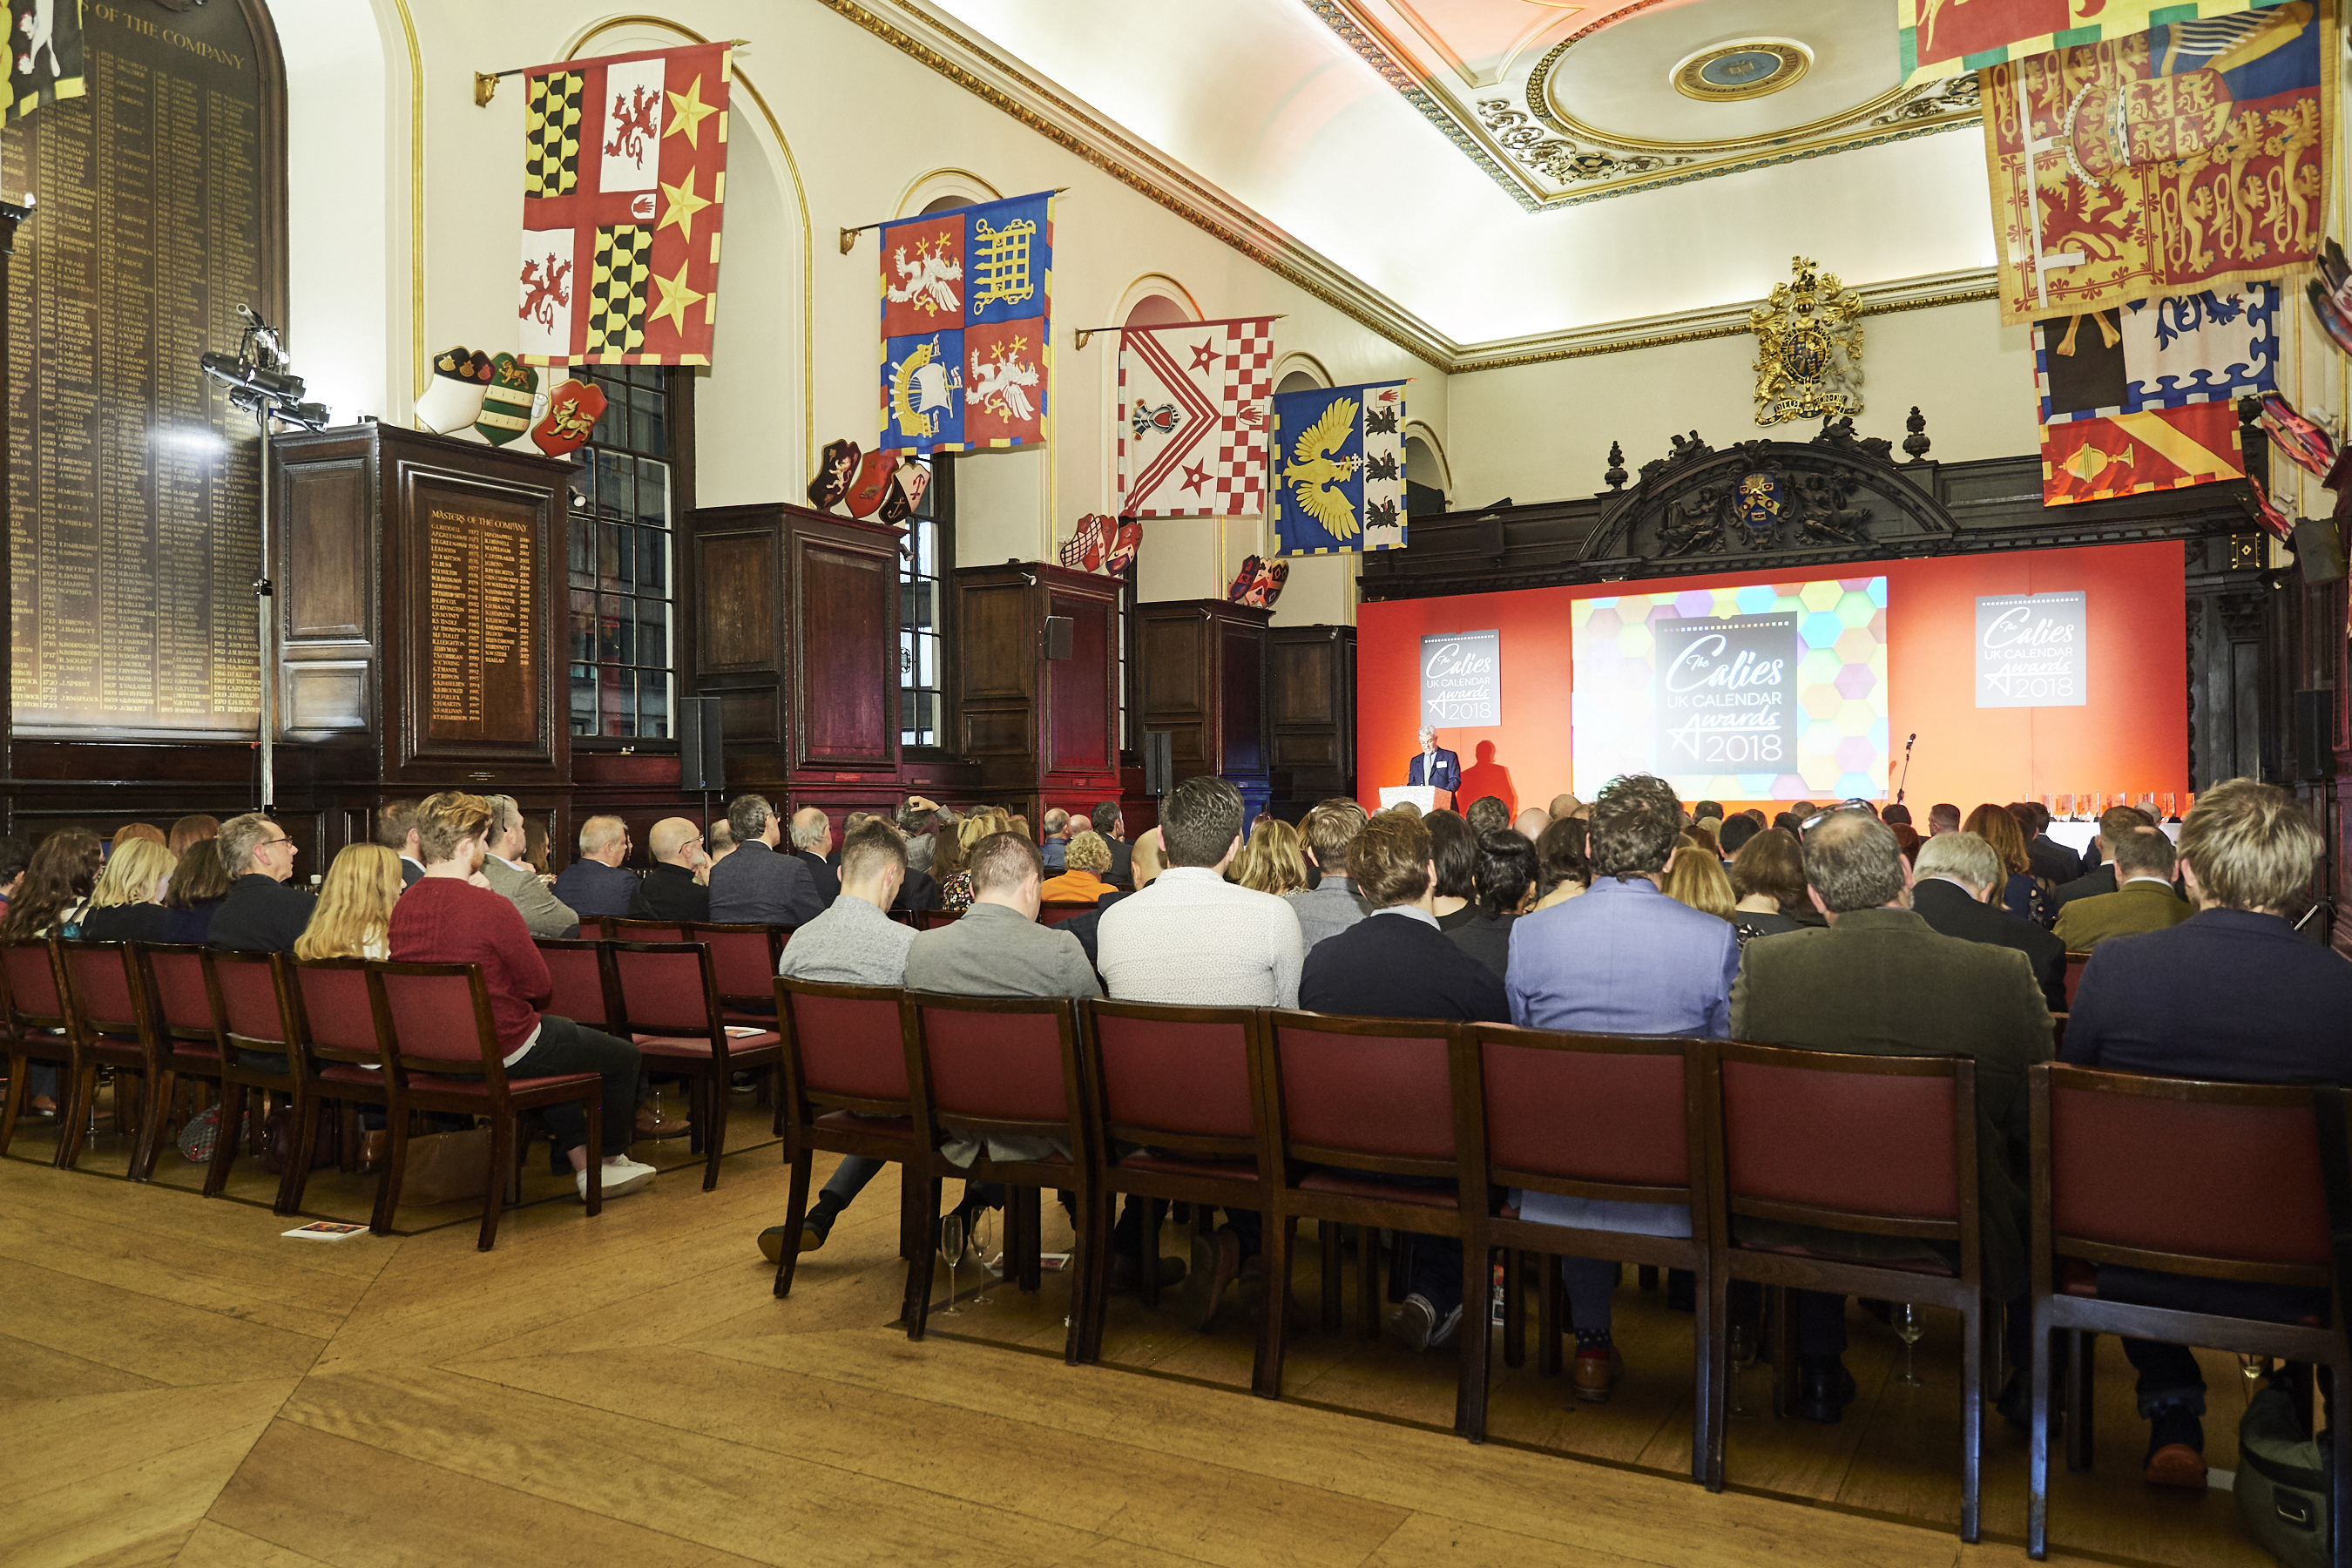 Above: The Calies awards event will take place once again at Stationers’ Hall in St Pauls, London. 